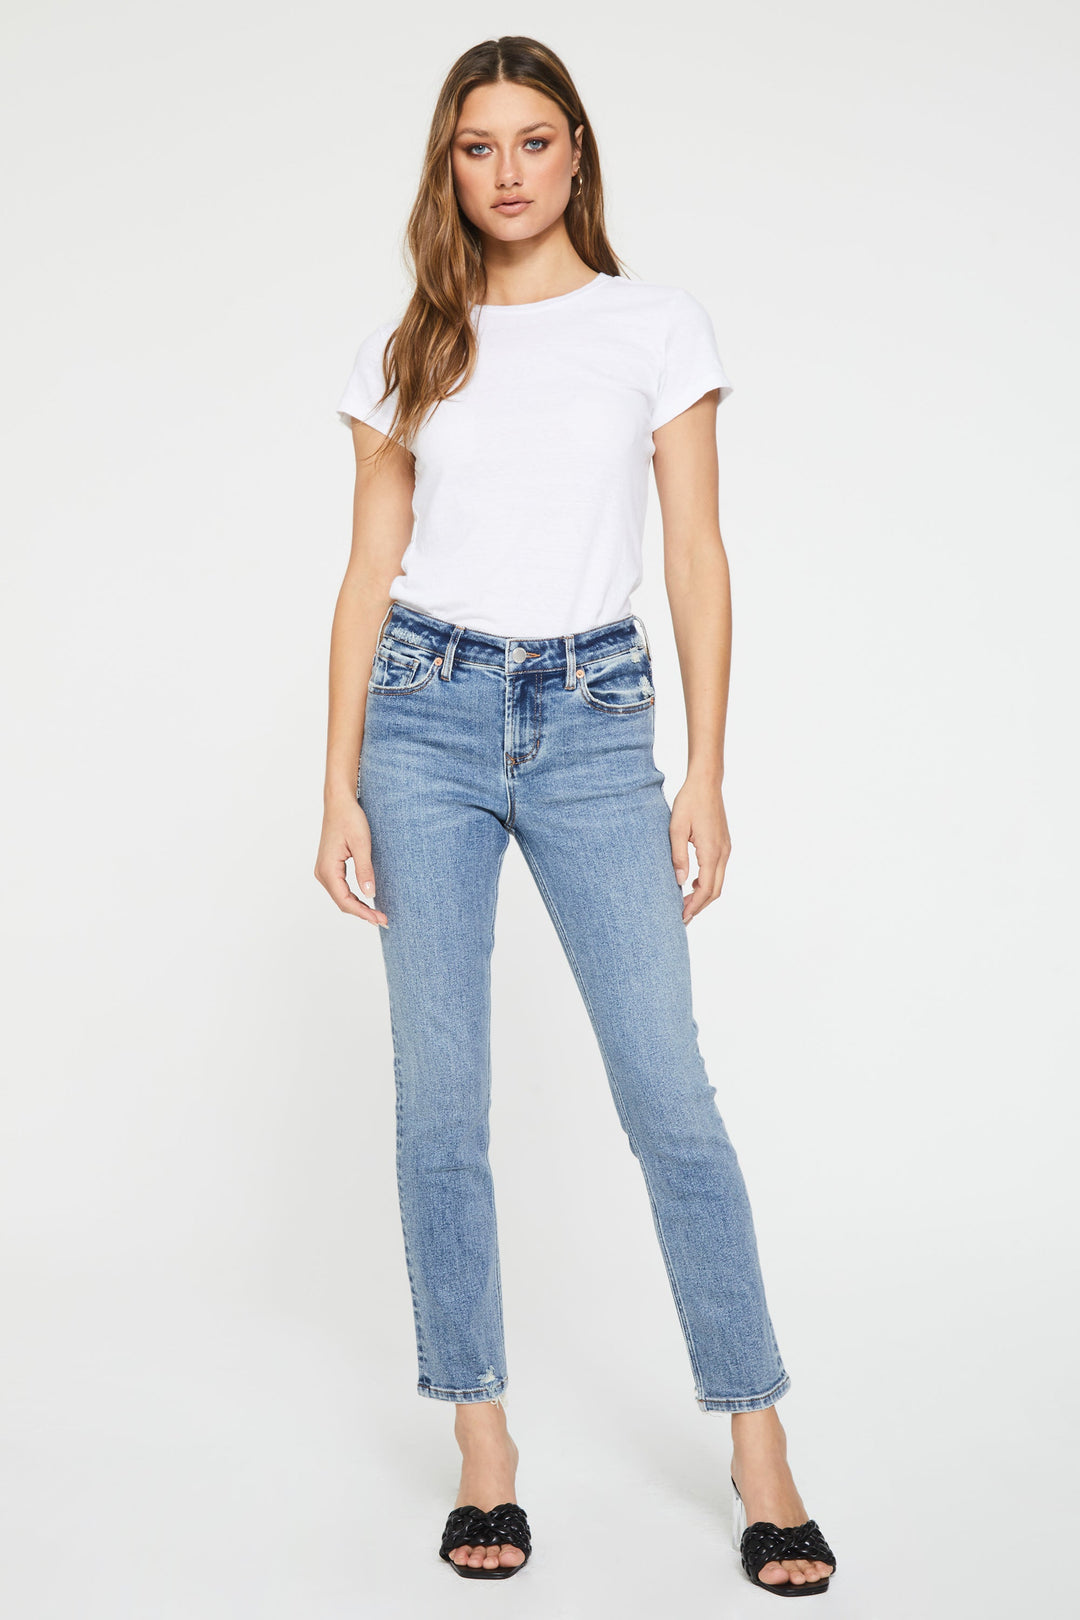 image of a female model wearing a BLAIRE HIGH RISE ANKLE SLIM STRAIGHT LEG JEANS BELCREST JEANS